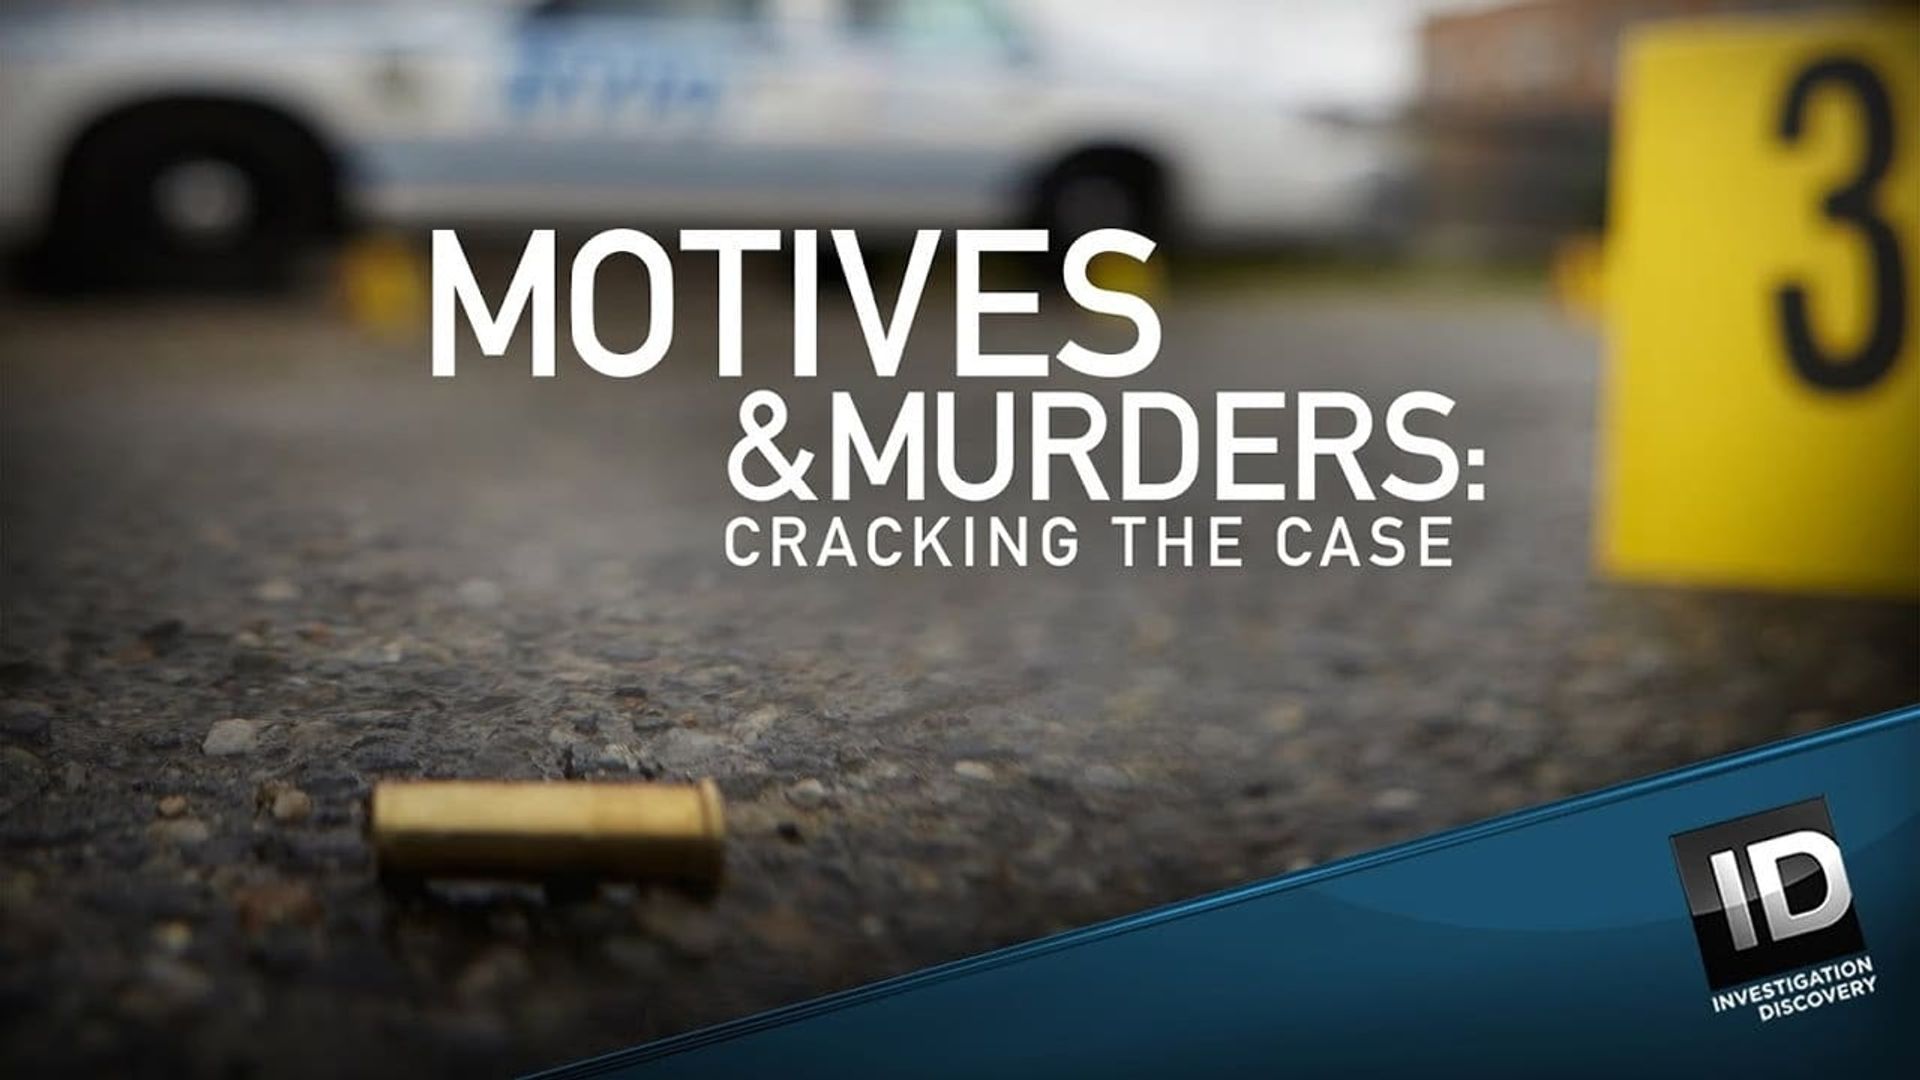 Motives & Murders: Cracking the Case background